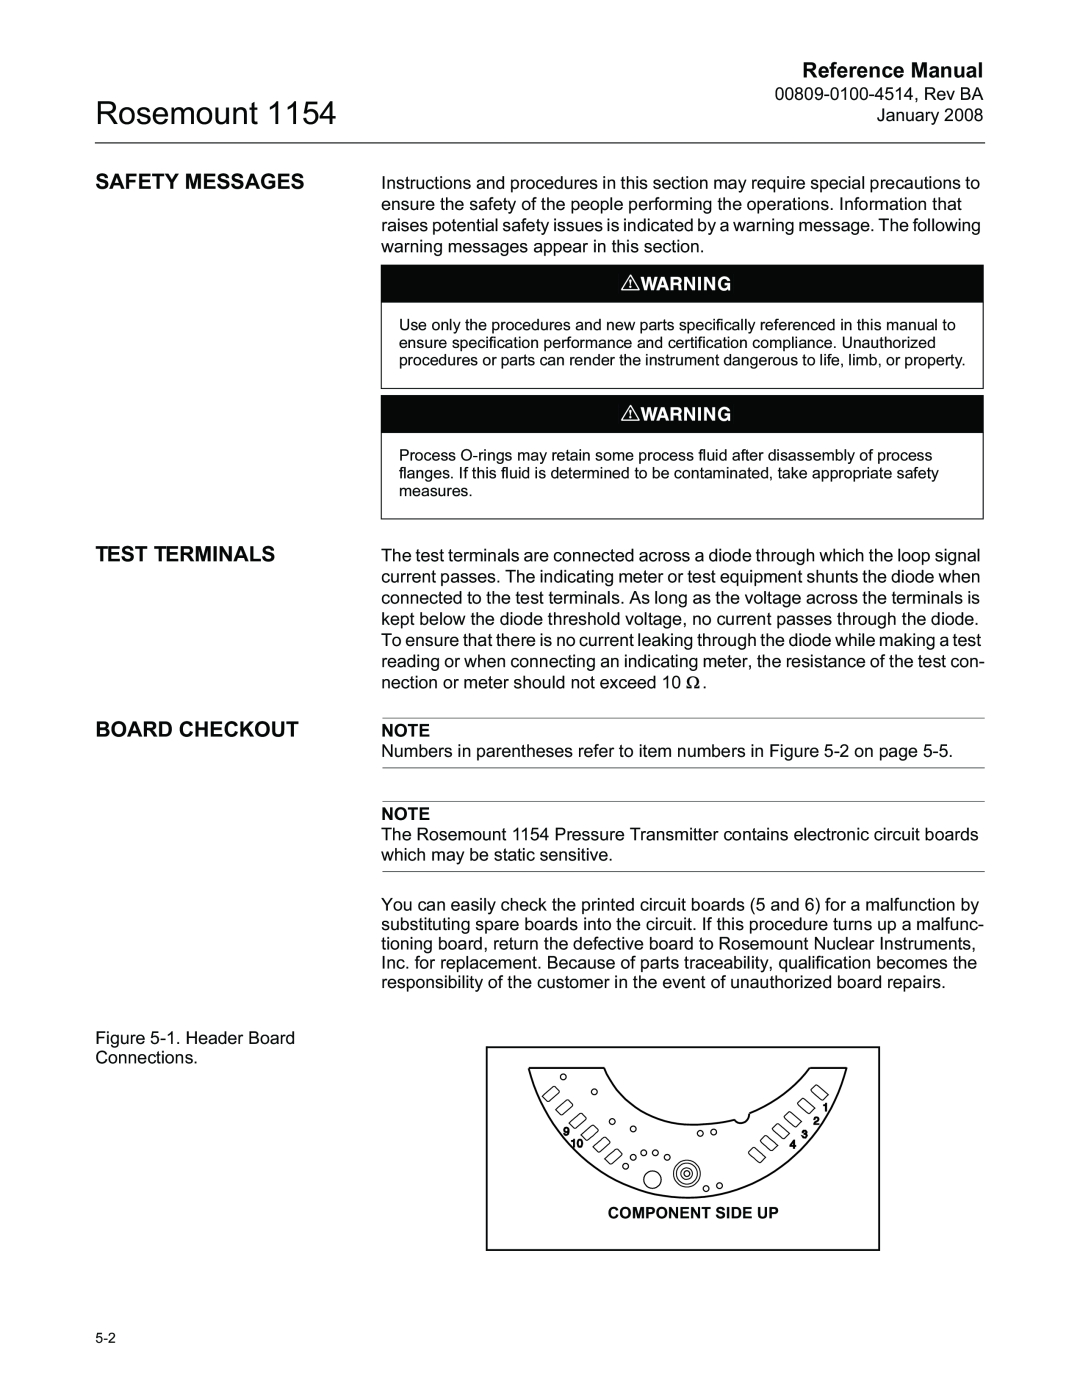 Emerson 00809-0100-4514 Safety Messages, Test Terminals Board Checkout, Rosemount, Reference Manual, Component Side Up 